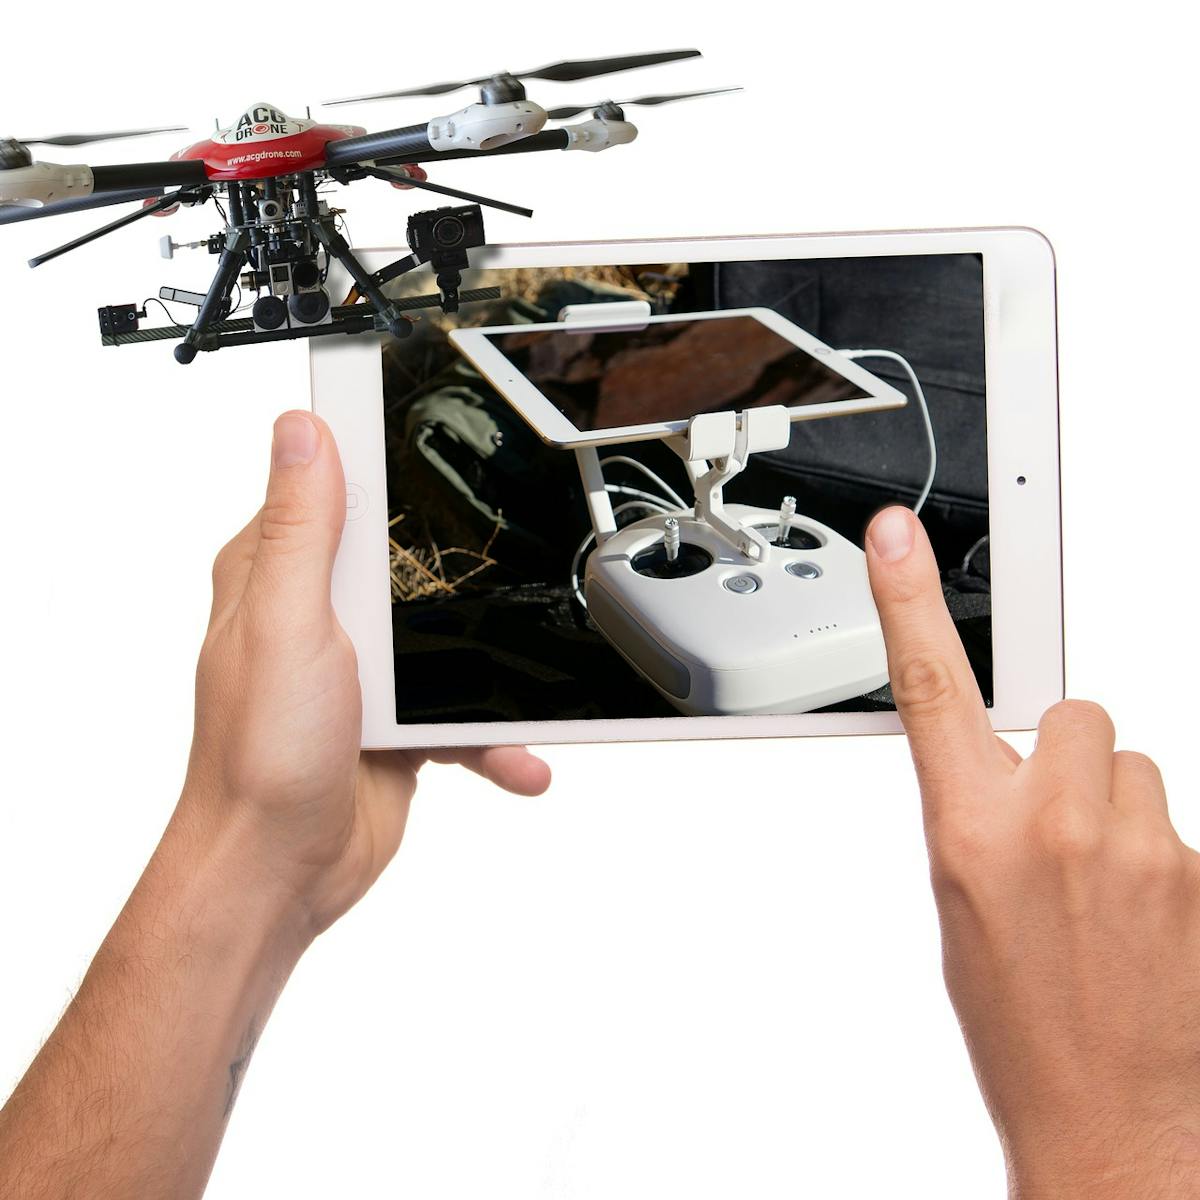 Drone image is for example only and is not representative of the model or equipment under investigation in the UCSD project mentioned in the content. (Photo credit: Image by Elias Sch. via Pixabay; used under free license for commercial or non-commercial purposes.)